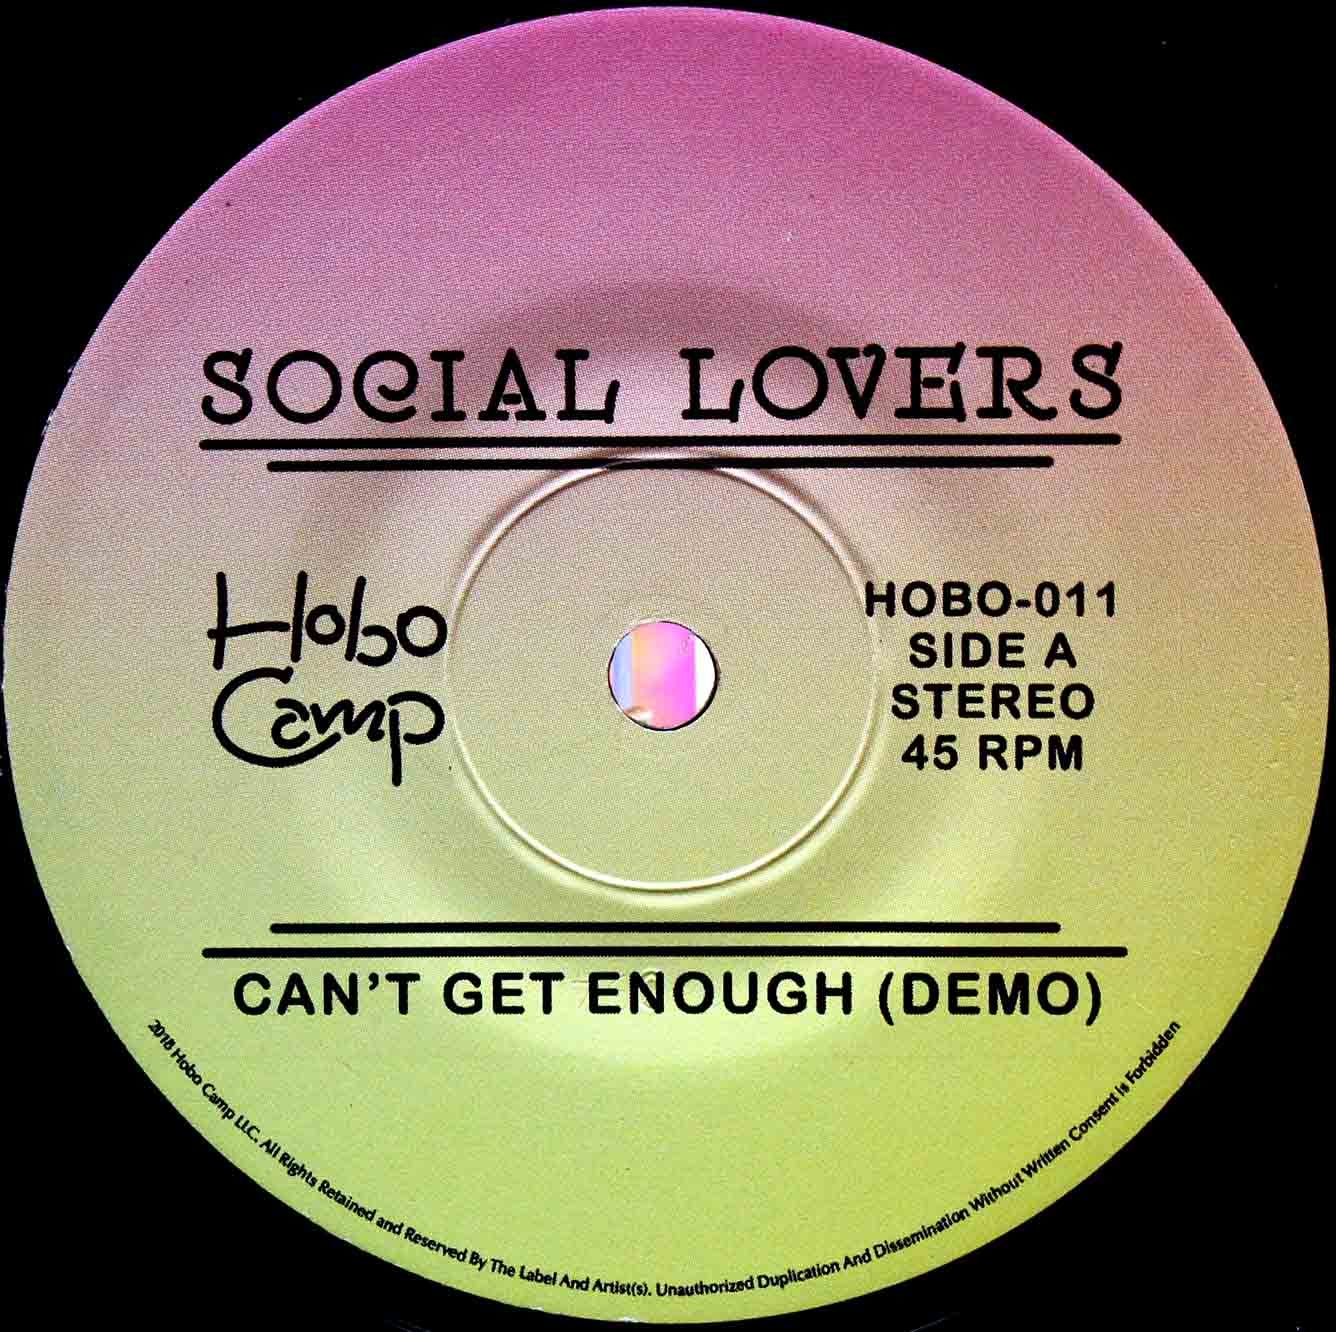 Social Lovers (2018) - Cant Get Enough 03